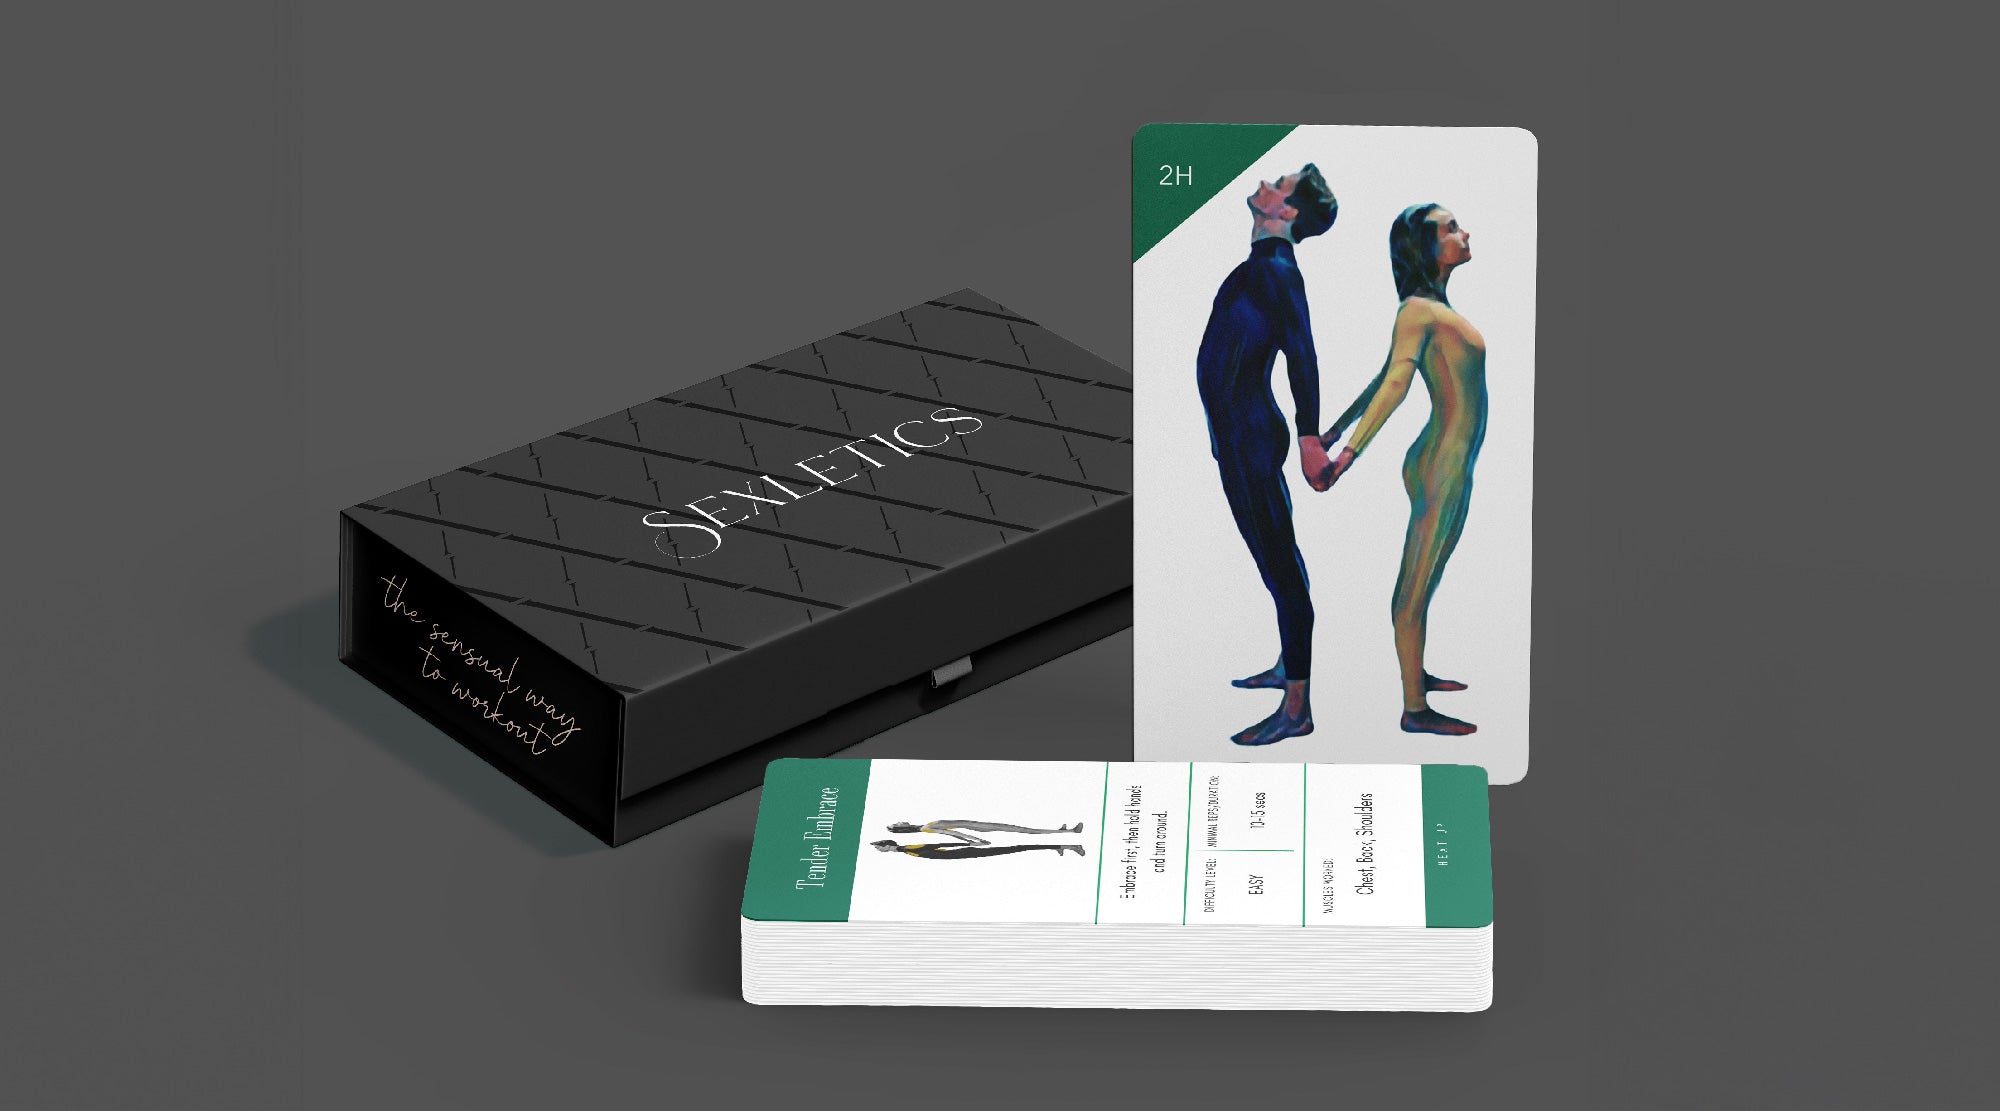 Couples exercise card deck with WOD